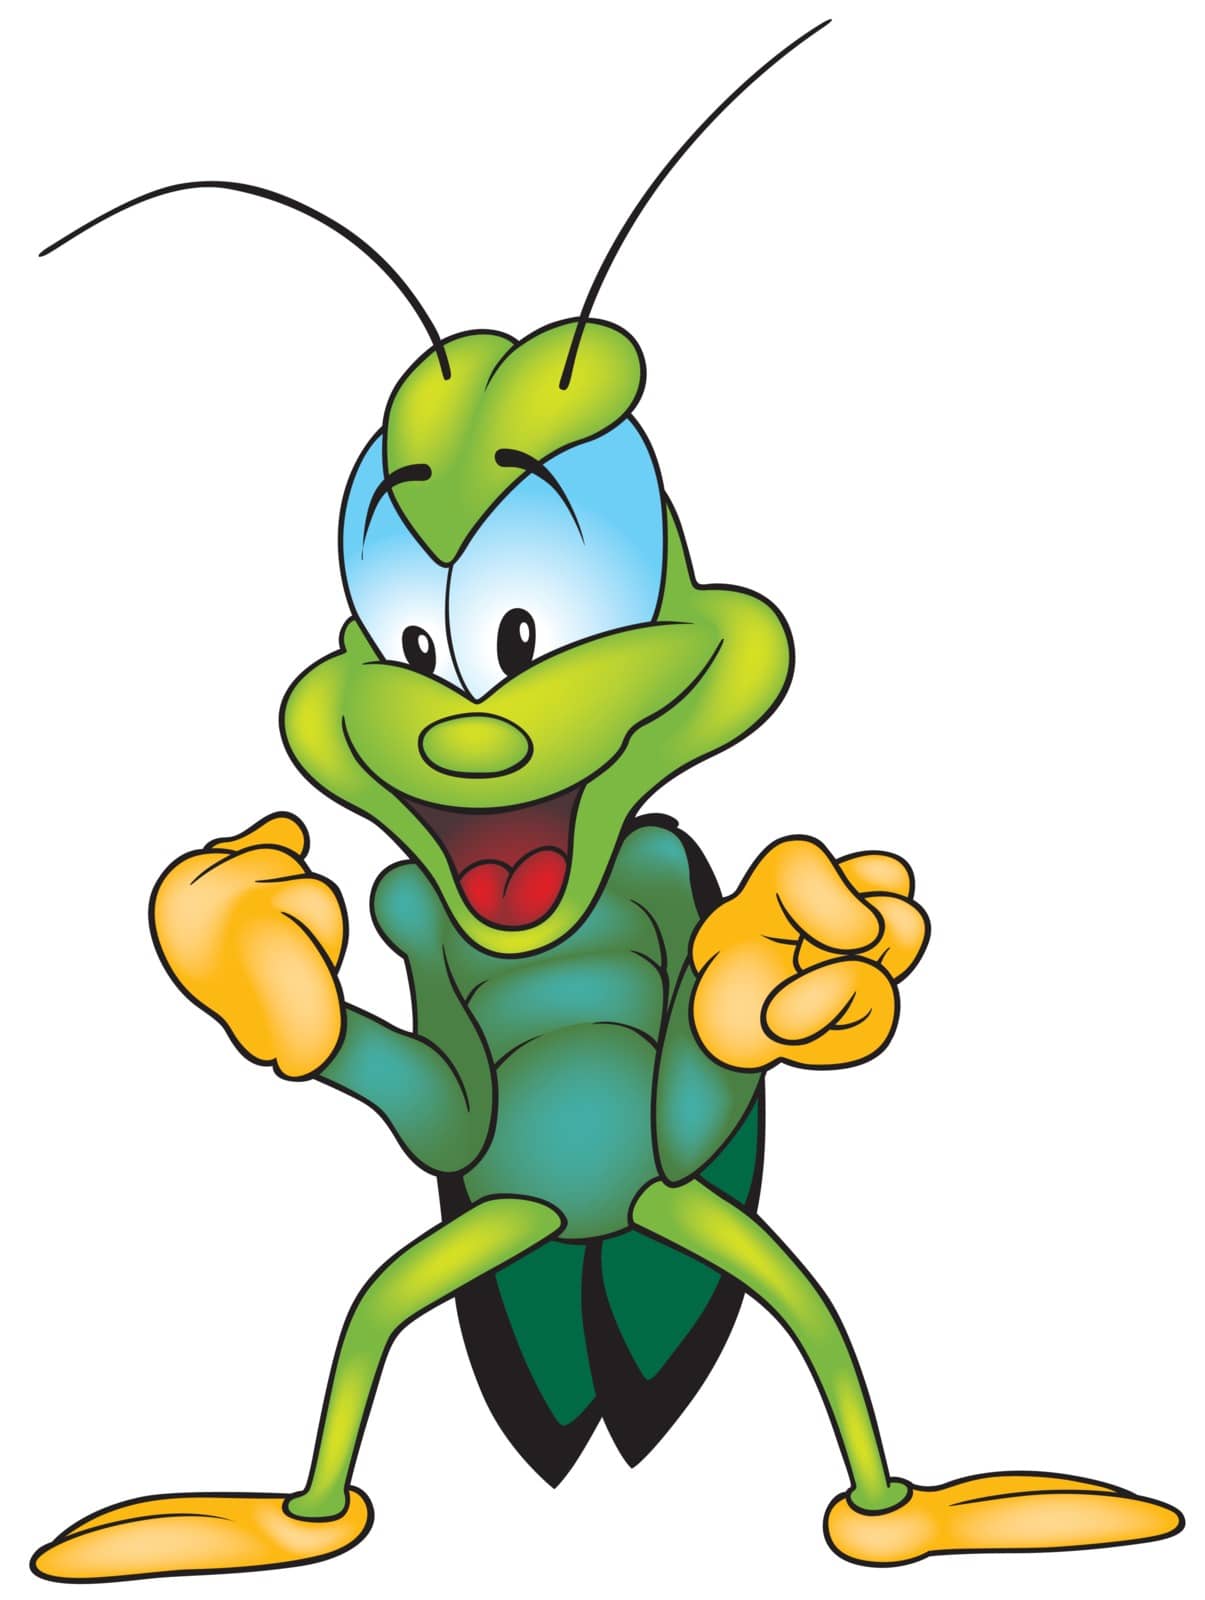 Laughing Green Bug - Colored Cartoon Illustration, Vector